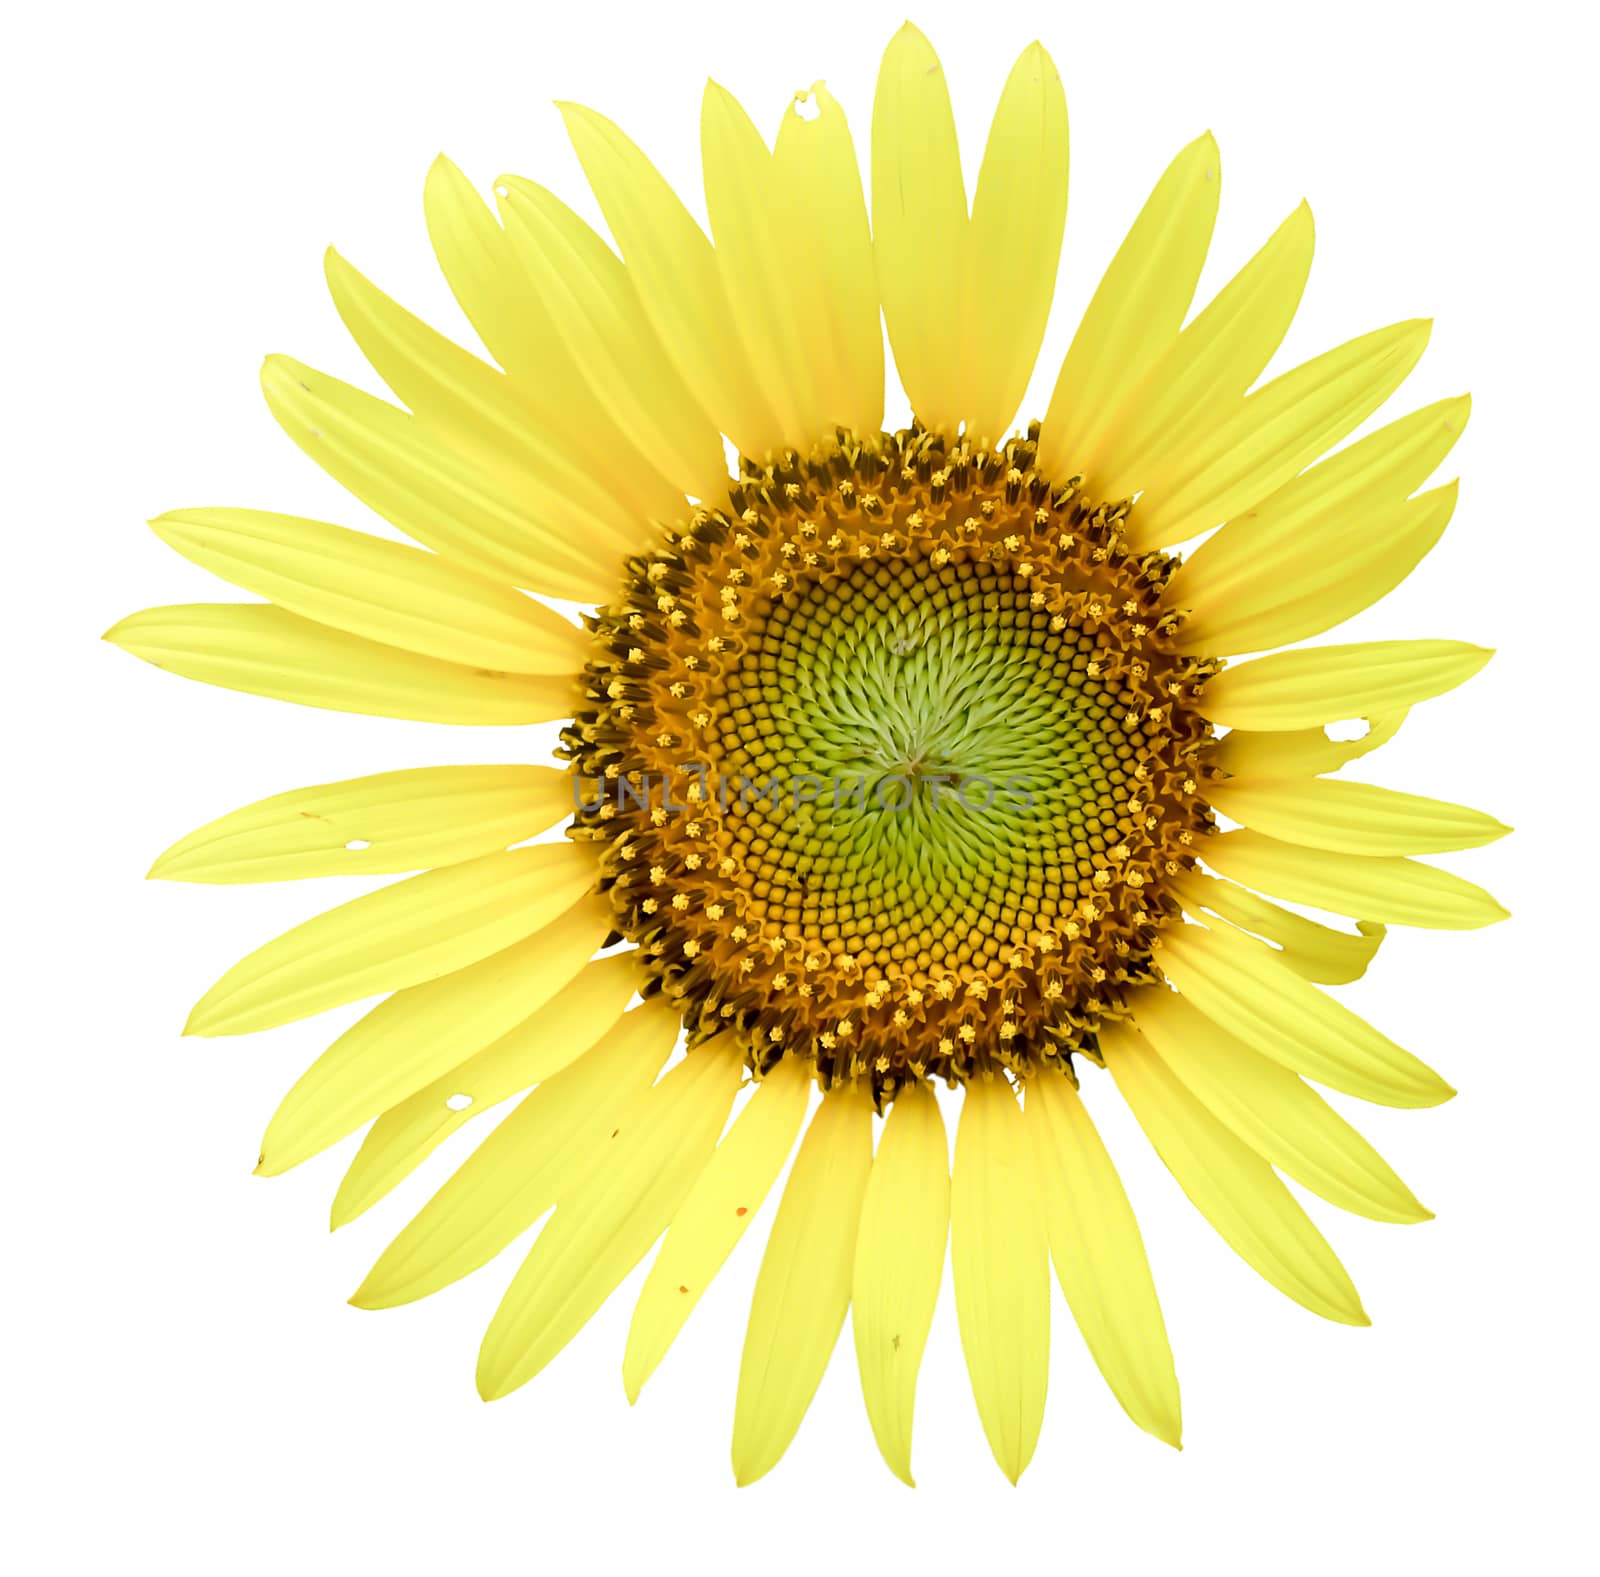 Sunflower isolated on white background by suthee